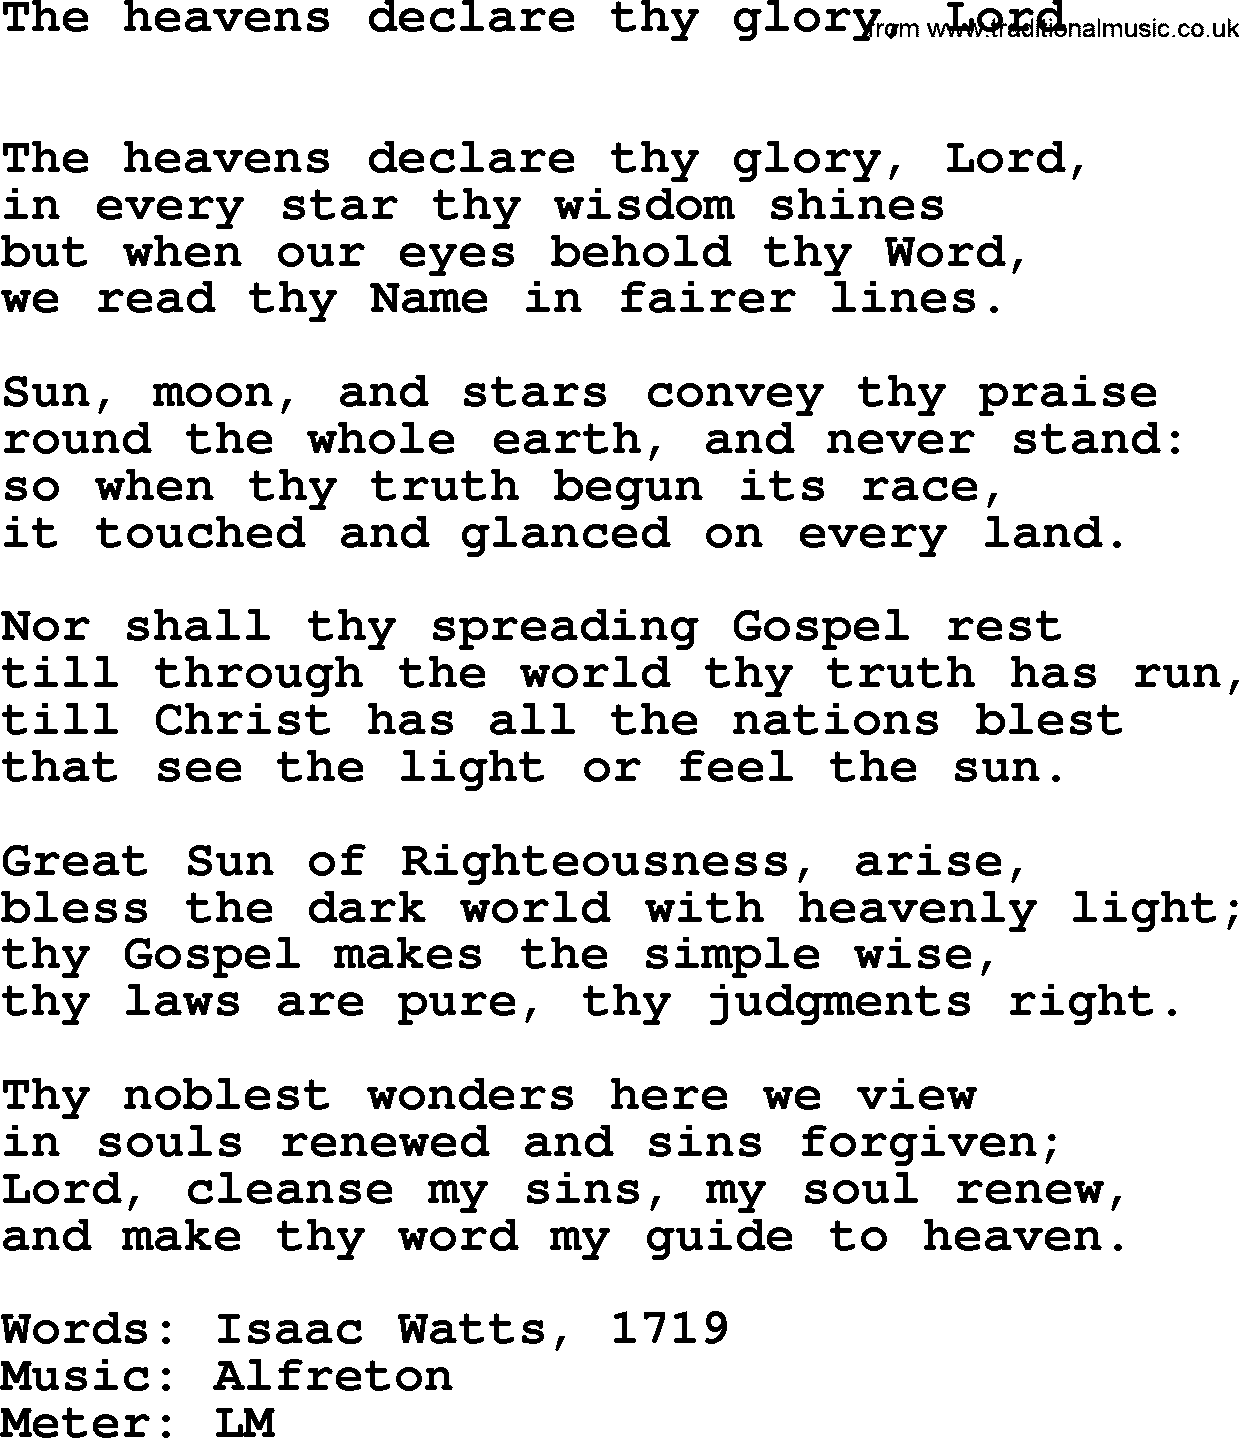 Hymns Ancient and Modern Hymn: The Heavens Declare Thy Glory, Lord, lyrics with midi music